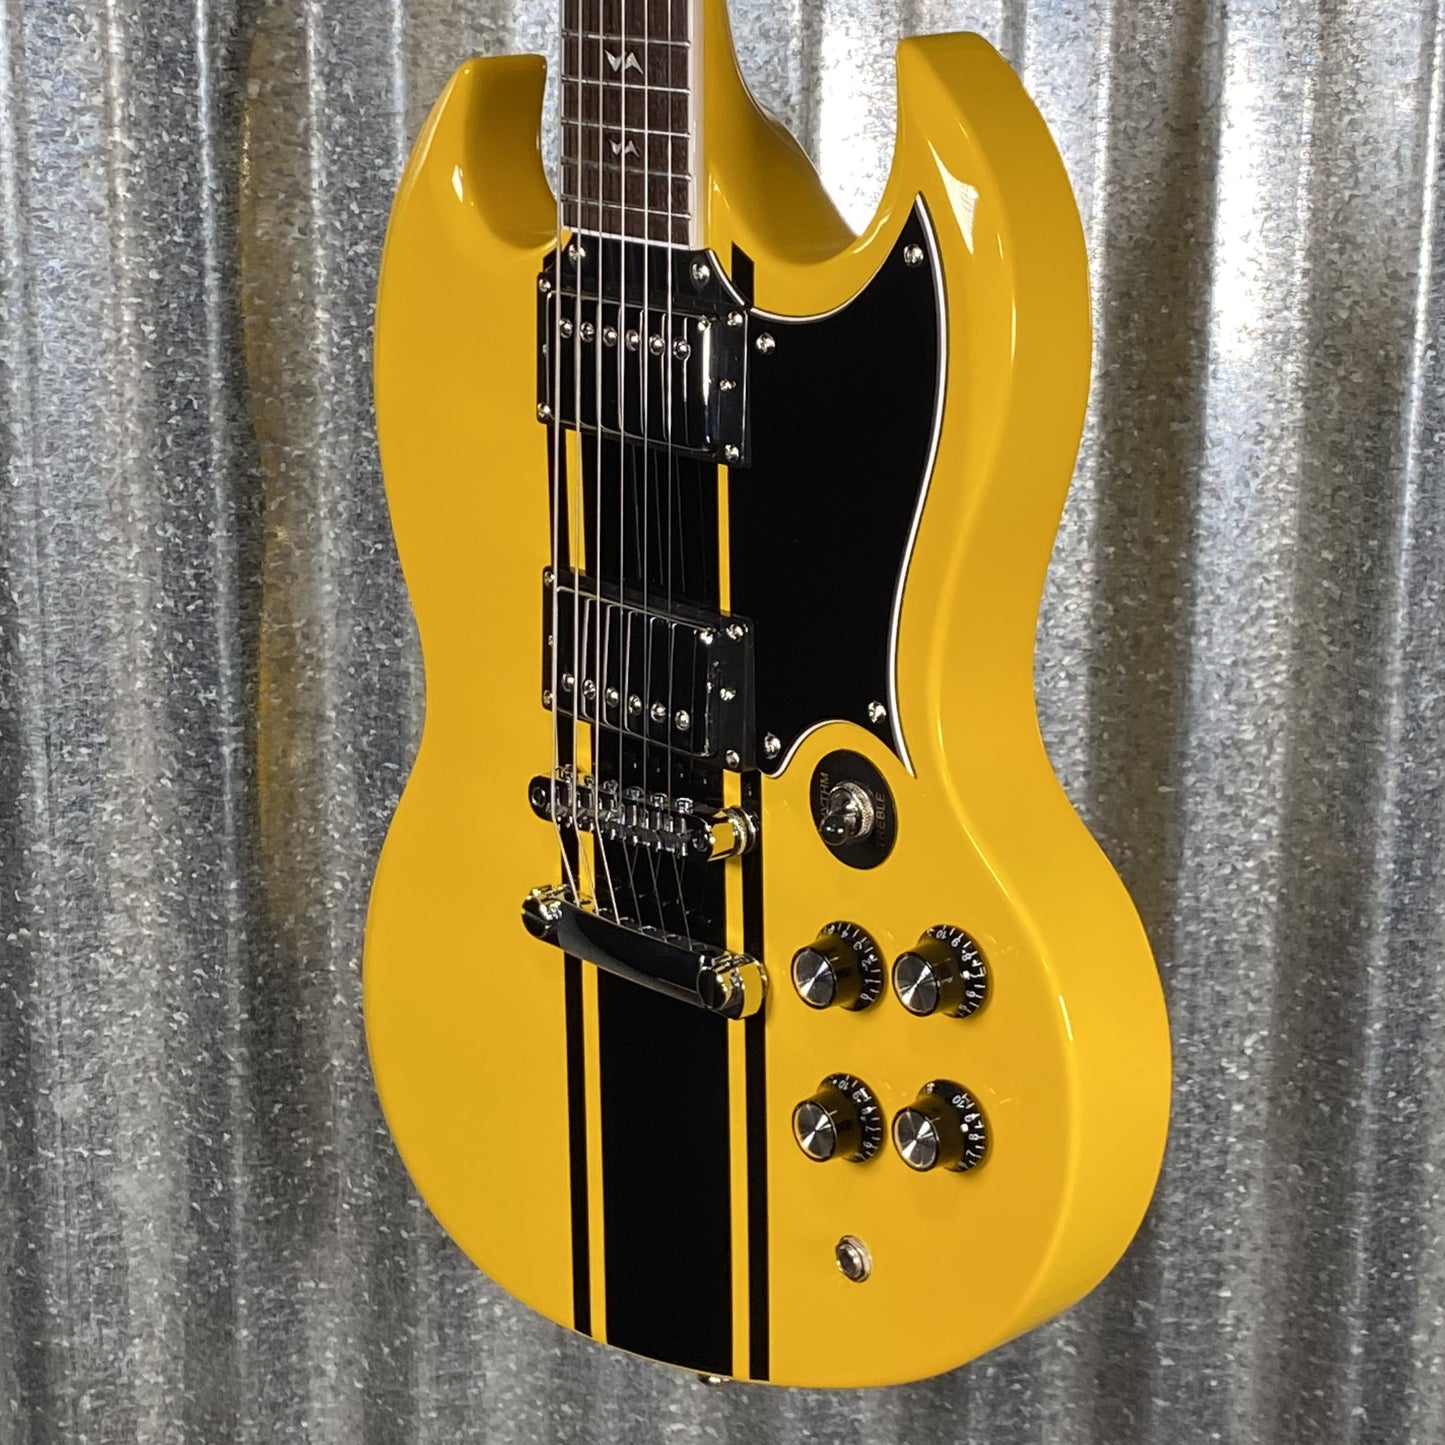 Westcreek Racer Offset SG Yellow Solid Body Guitar #0336 Used